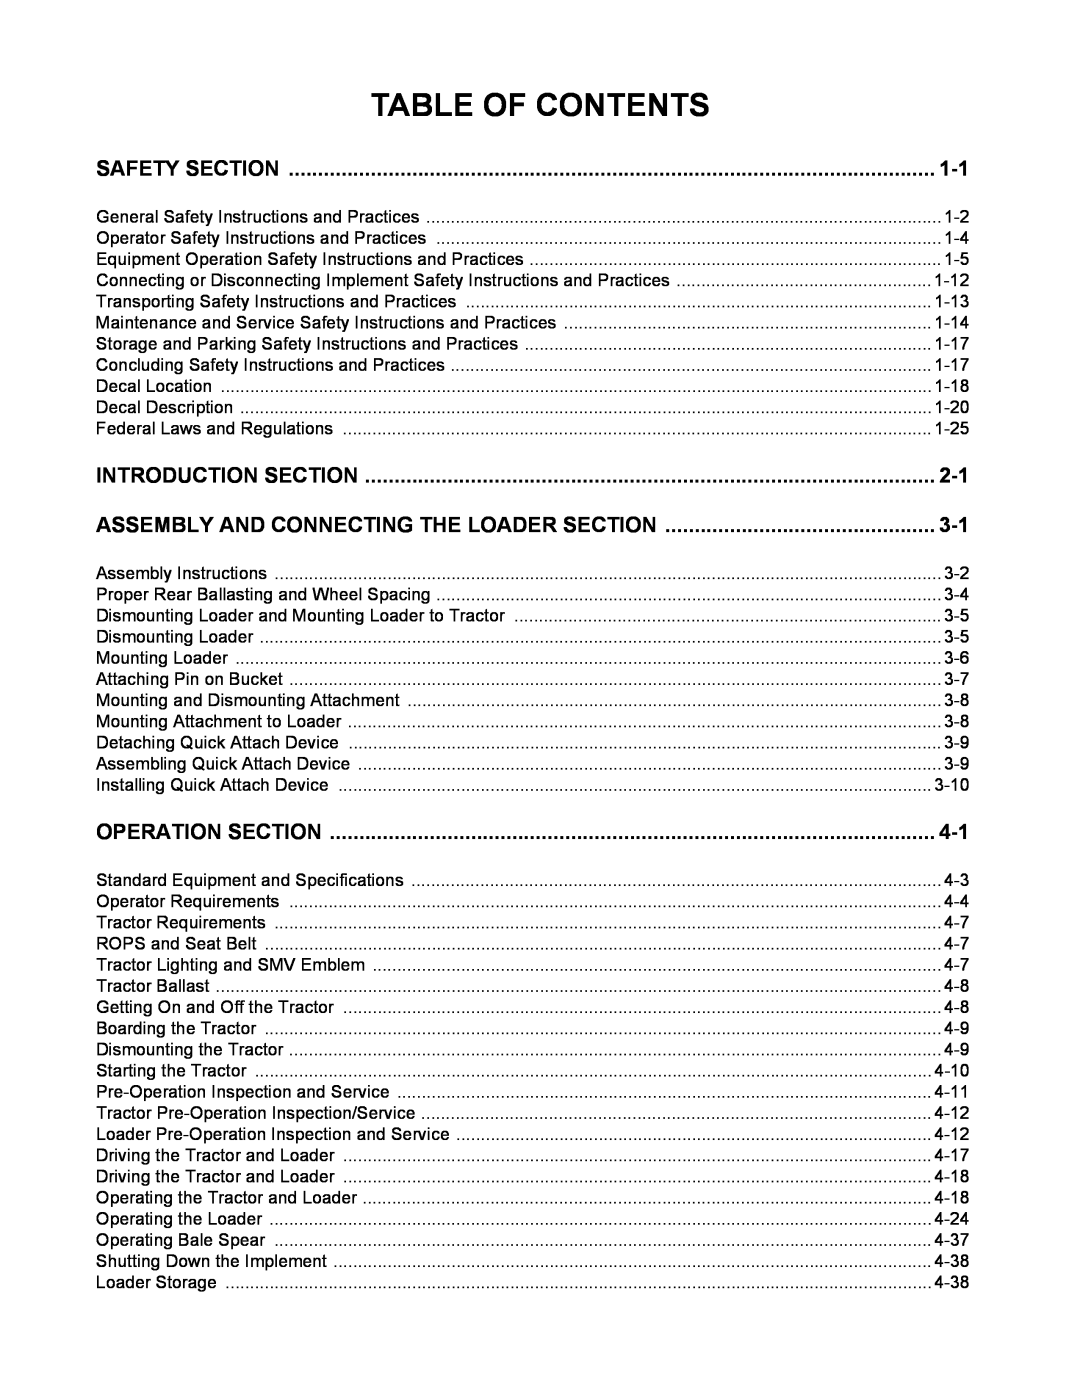 Servis-Rhino 5211 Table Of Contents, Safety Section, Introduction Section, Assembly And Connecting The Loader Section 